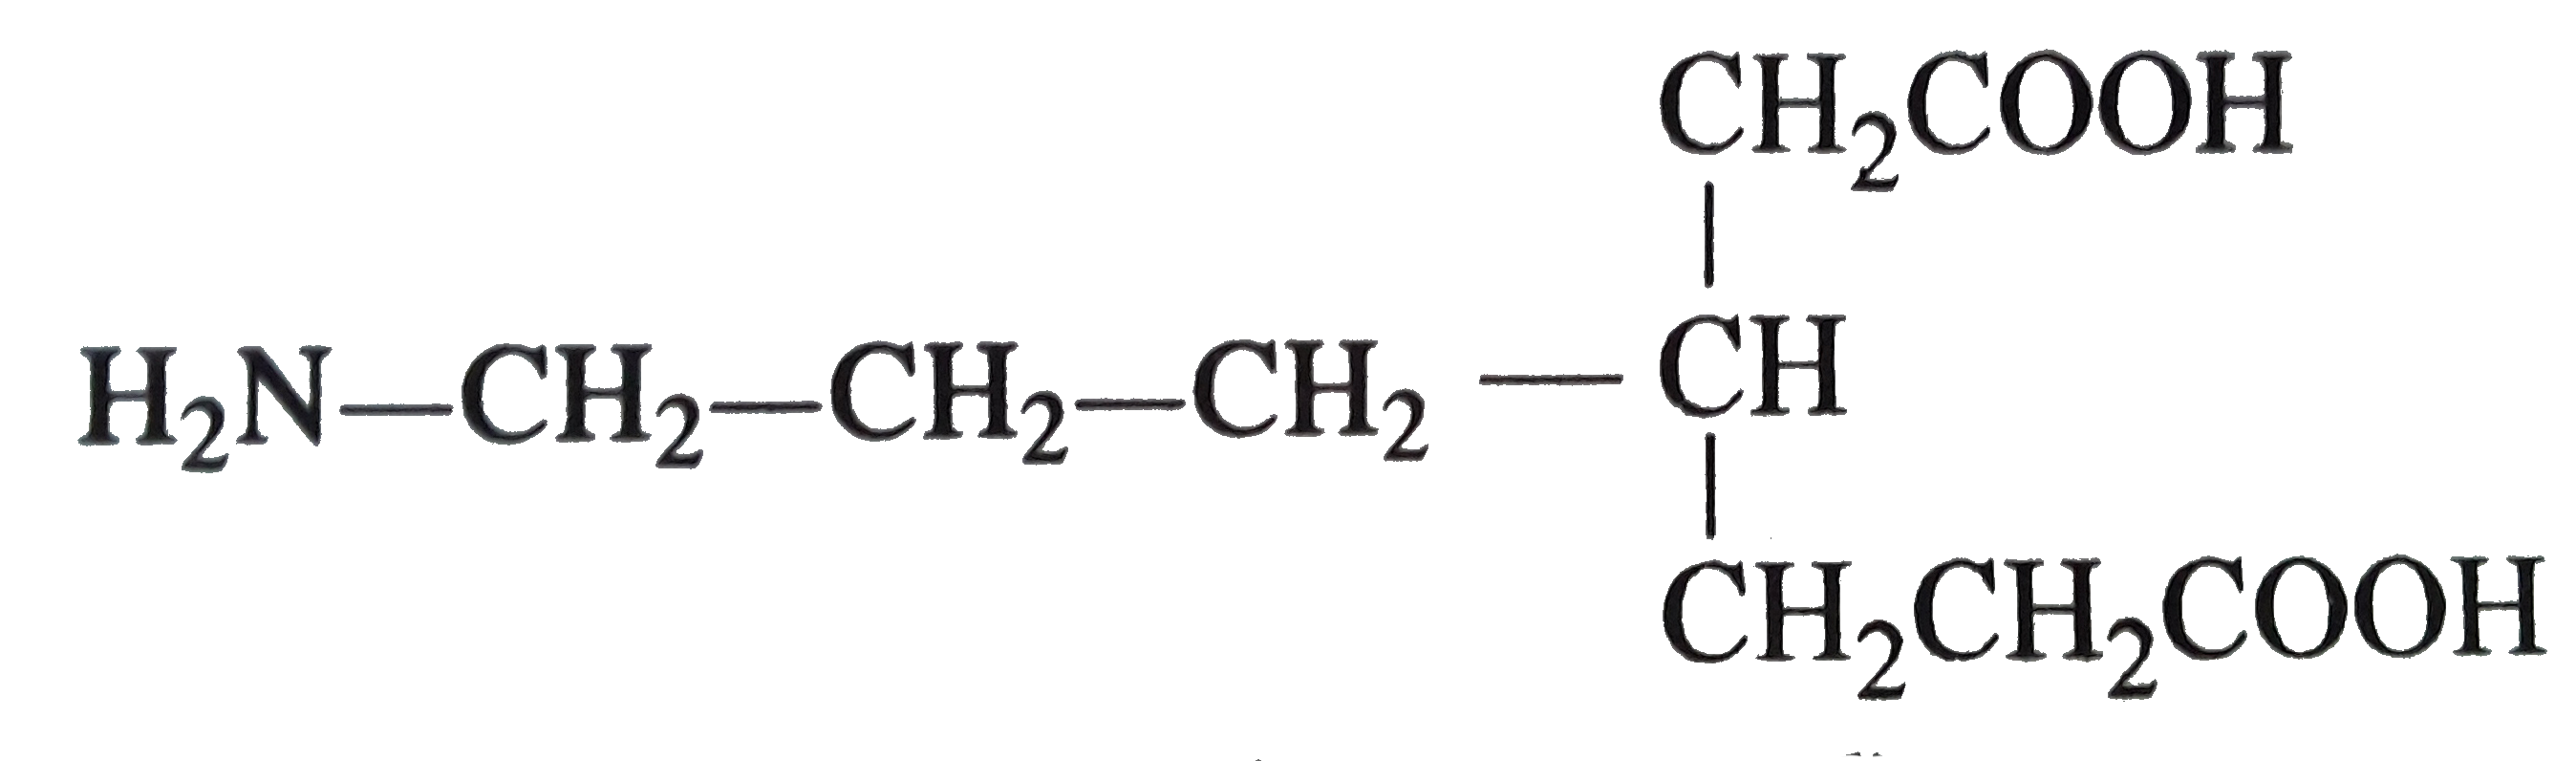 The correct name of compound given below is